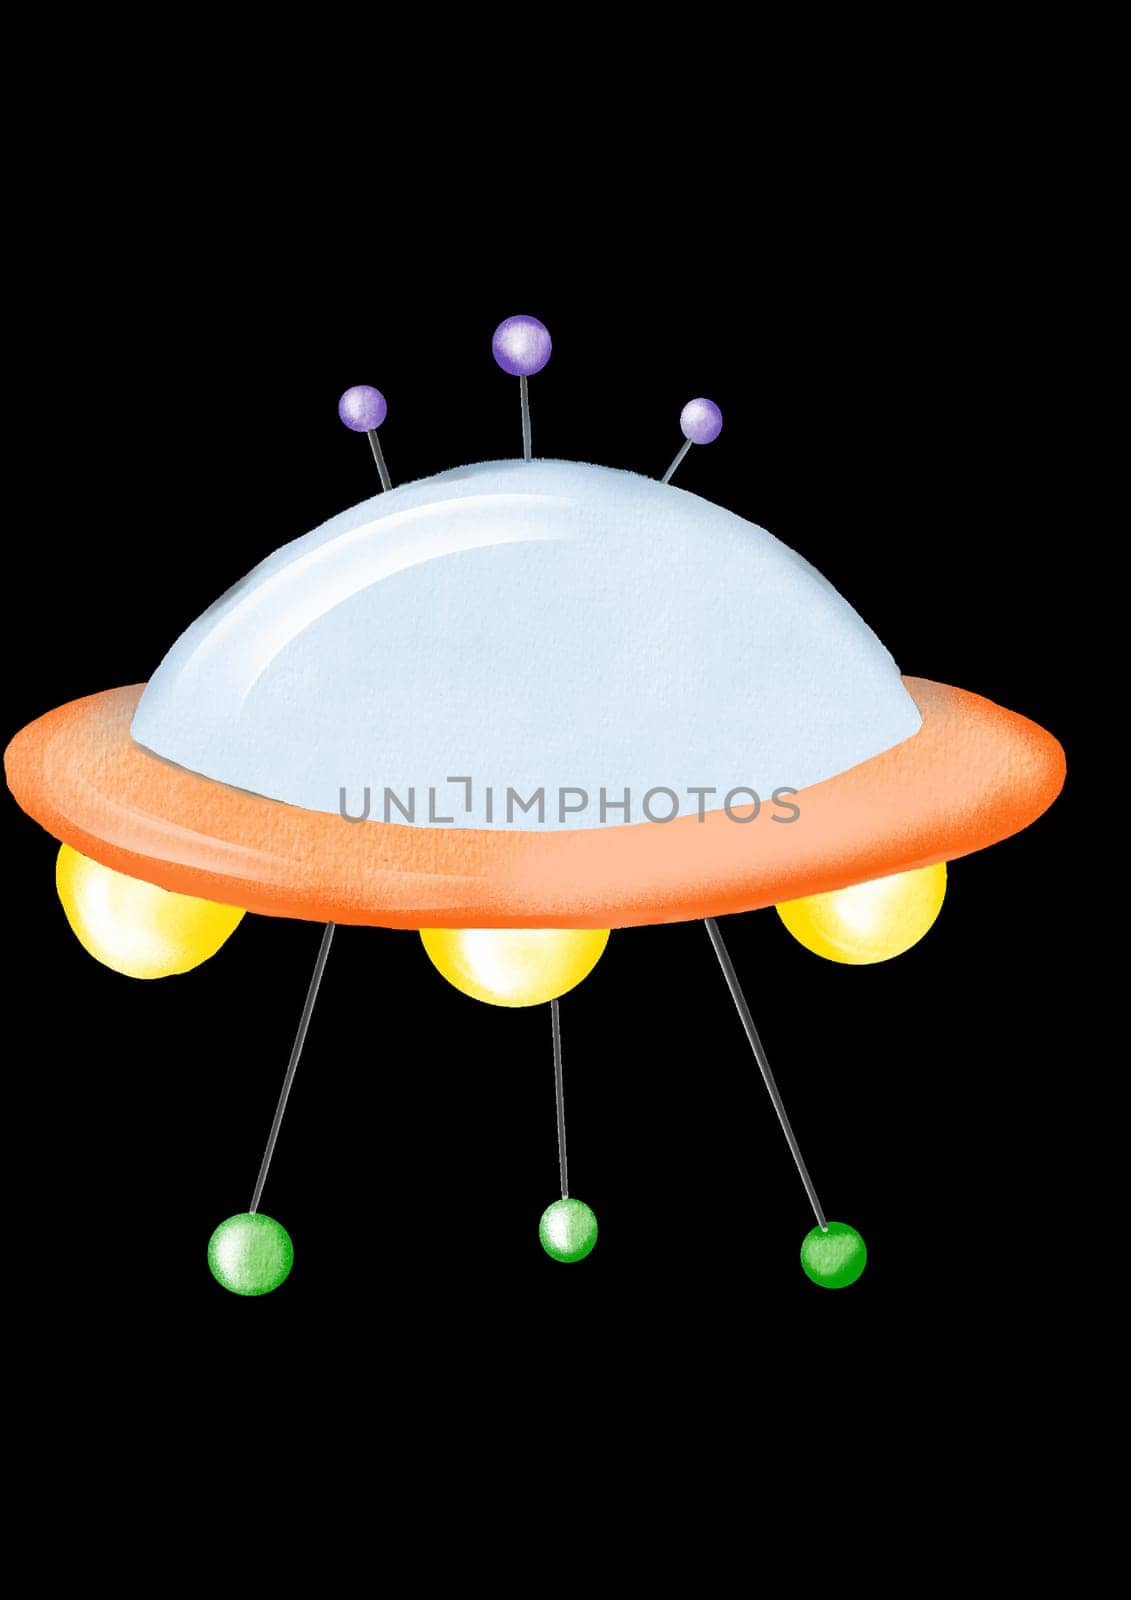 cartoon spaceship illustration. for printing on T-shirts, children's textiles, stickers. High quality illustration